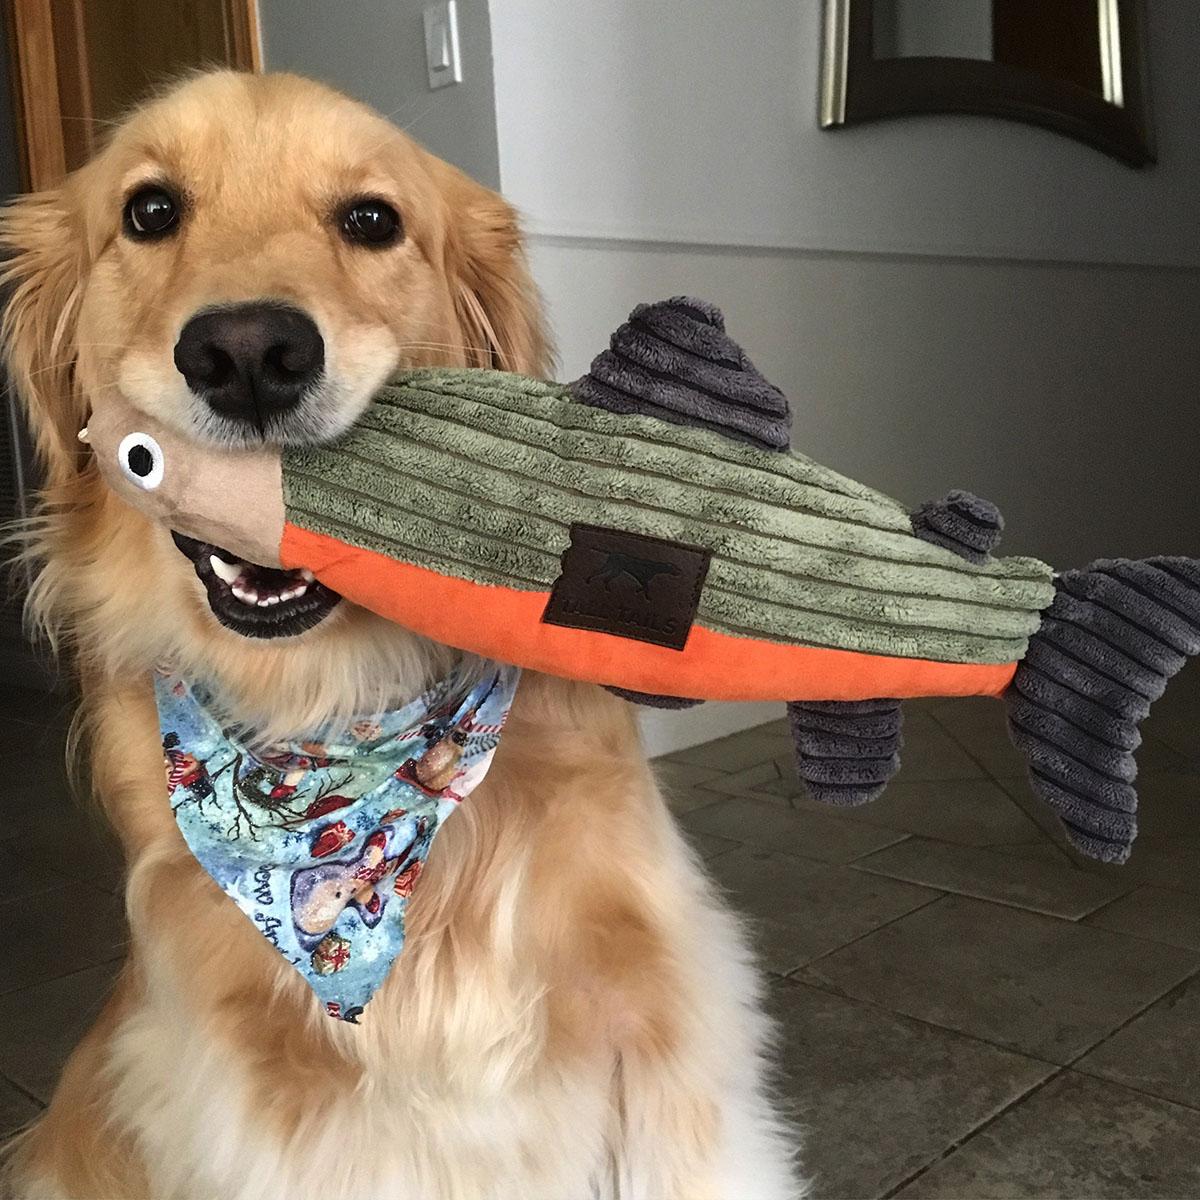 Tall Tails Fish Dog Toy with Same Day Shipping BaxterBoo